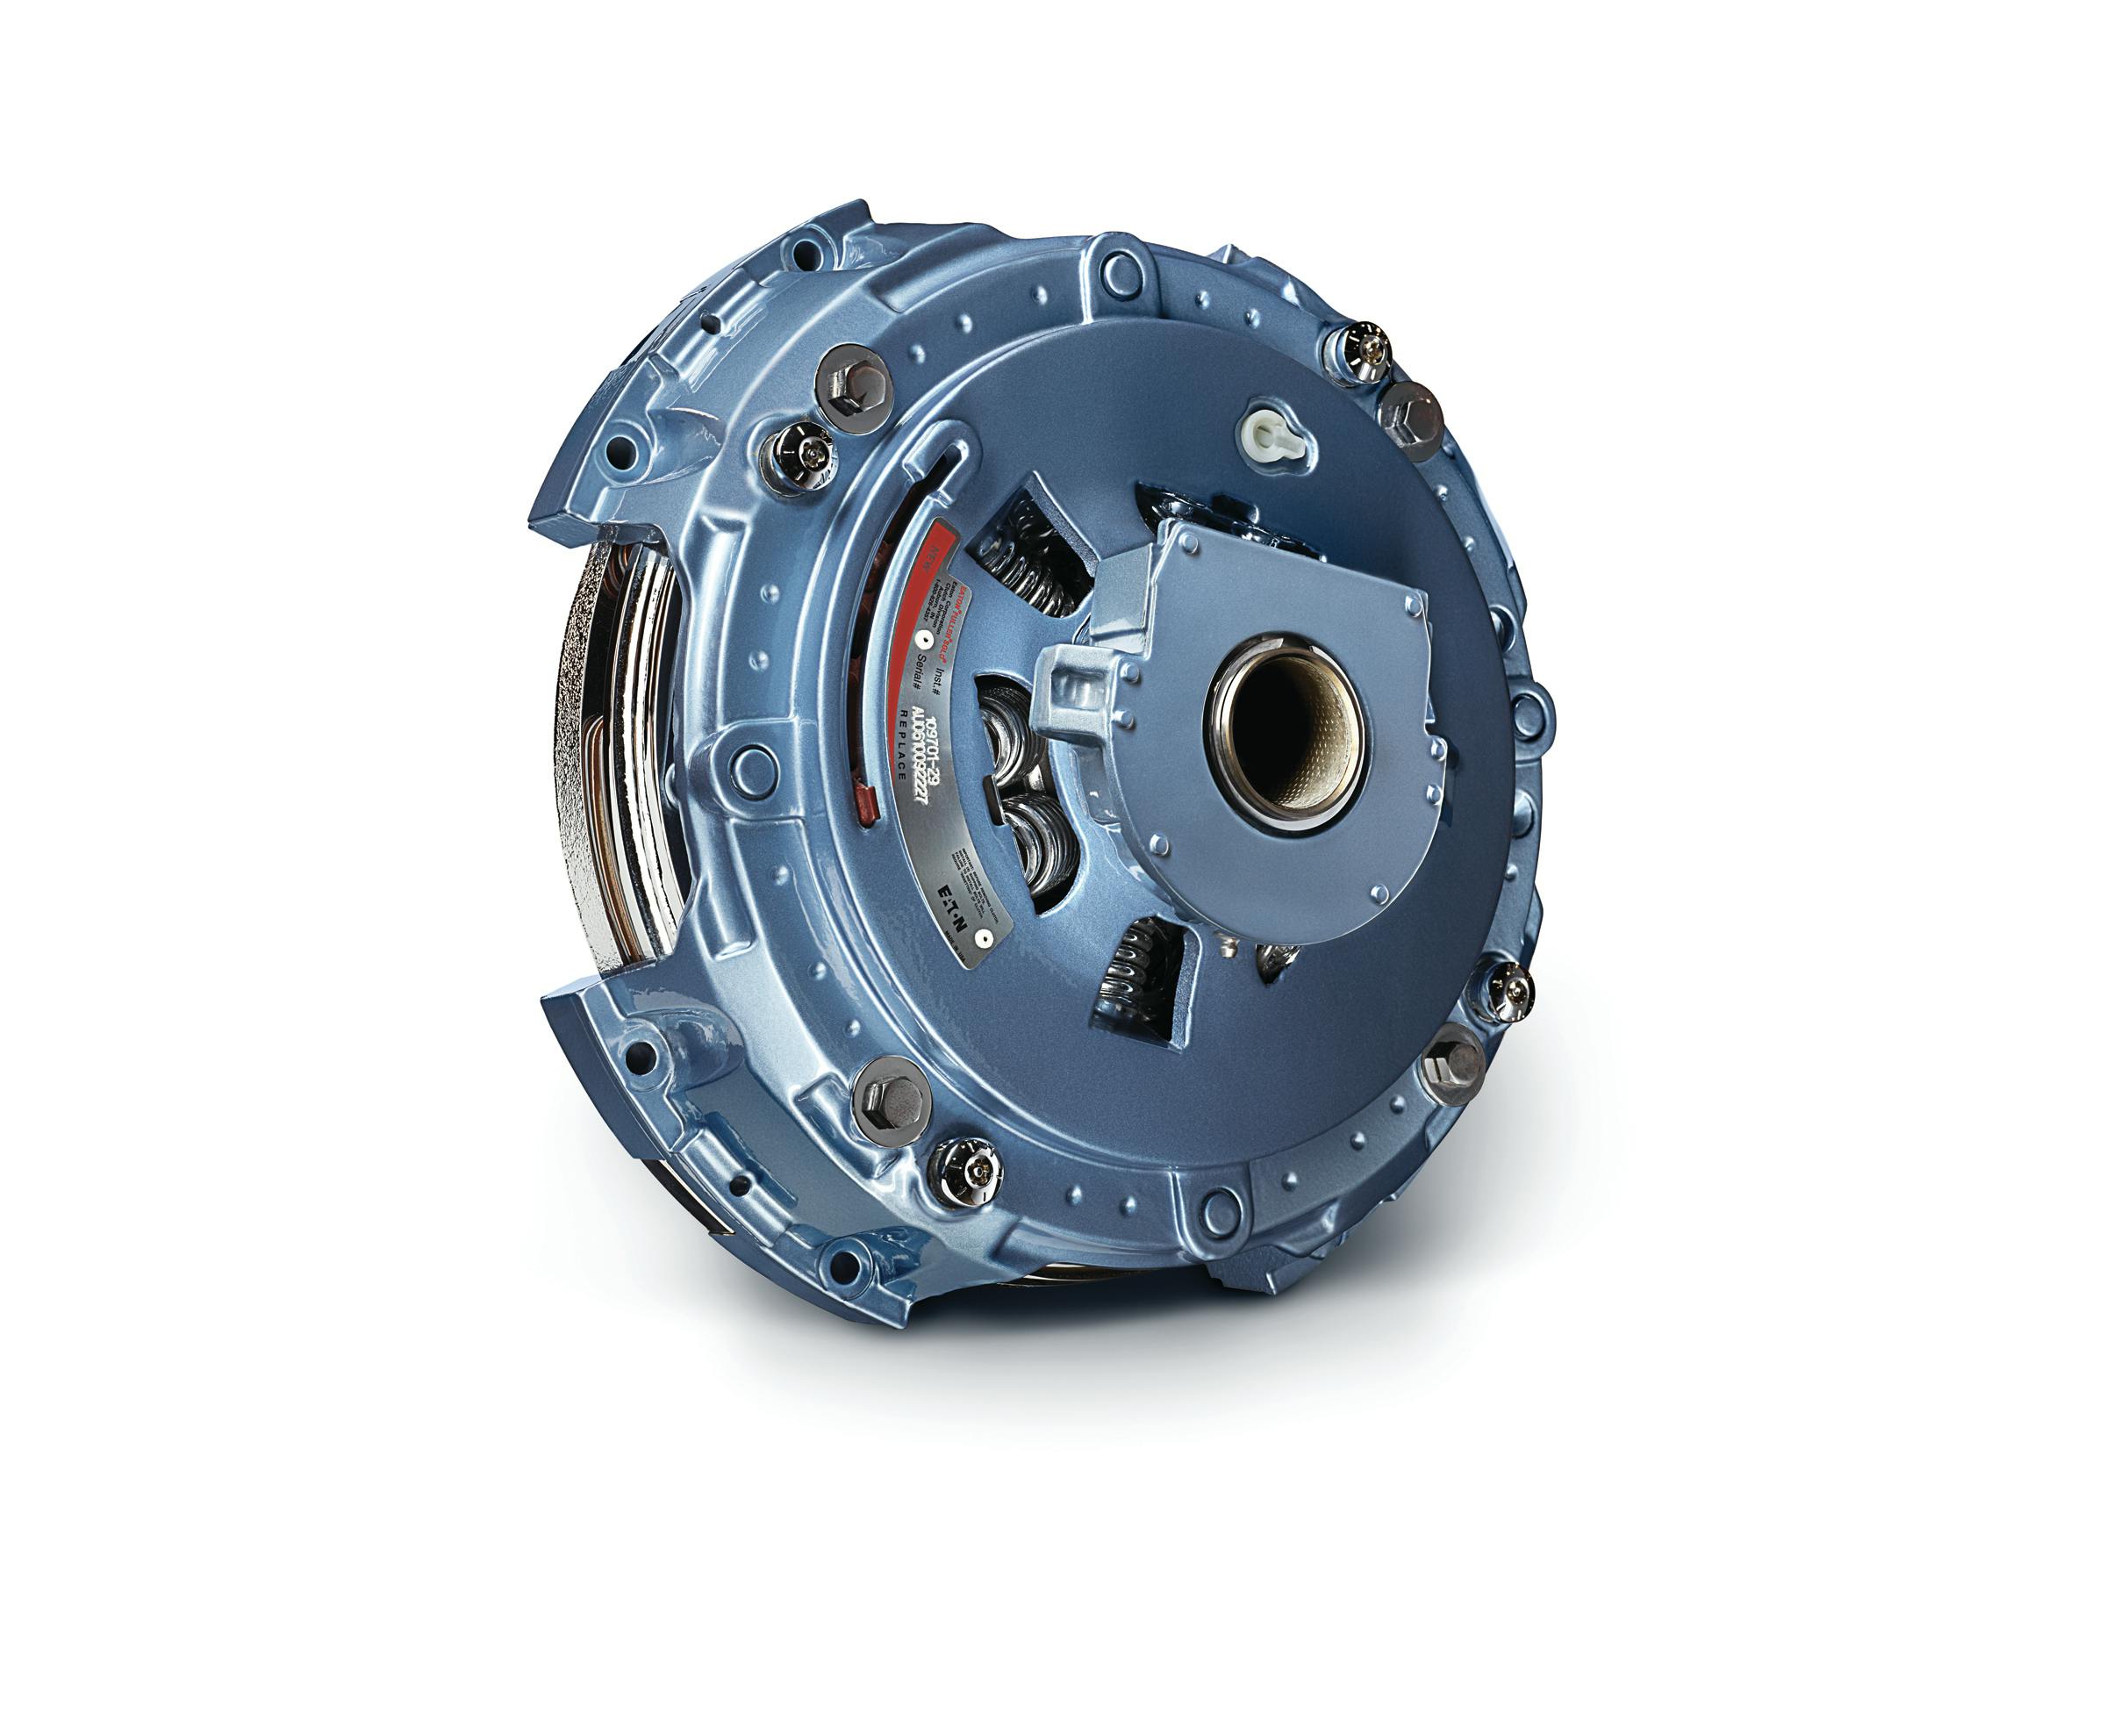 Eaton Offers Additional Warranty for Aftermarket Clutches | Construction News